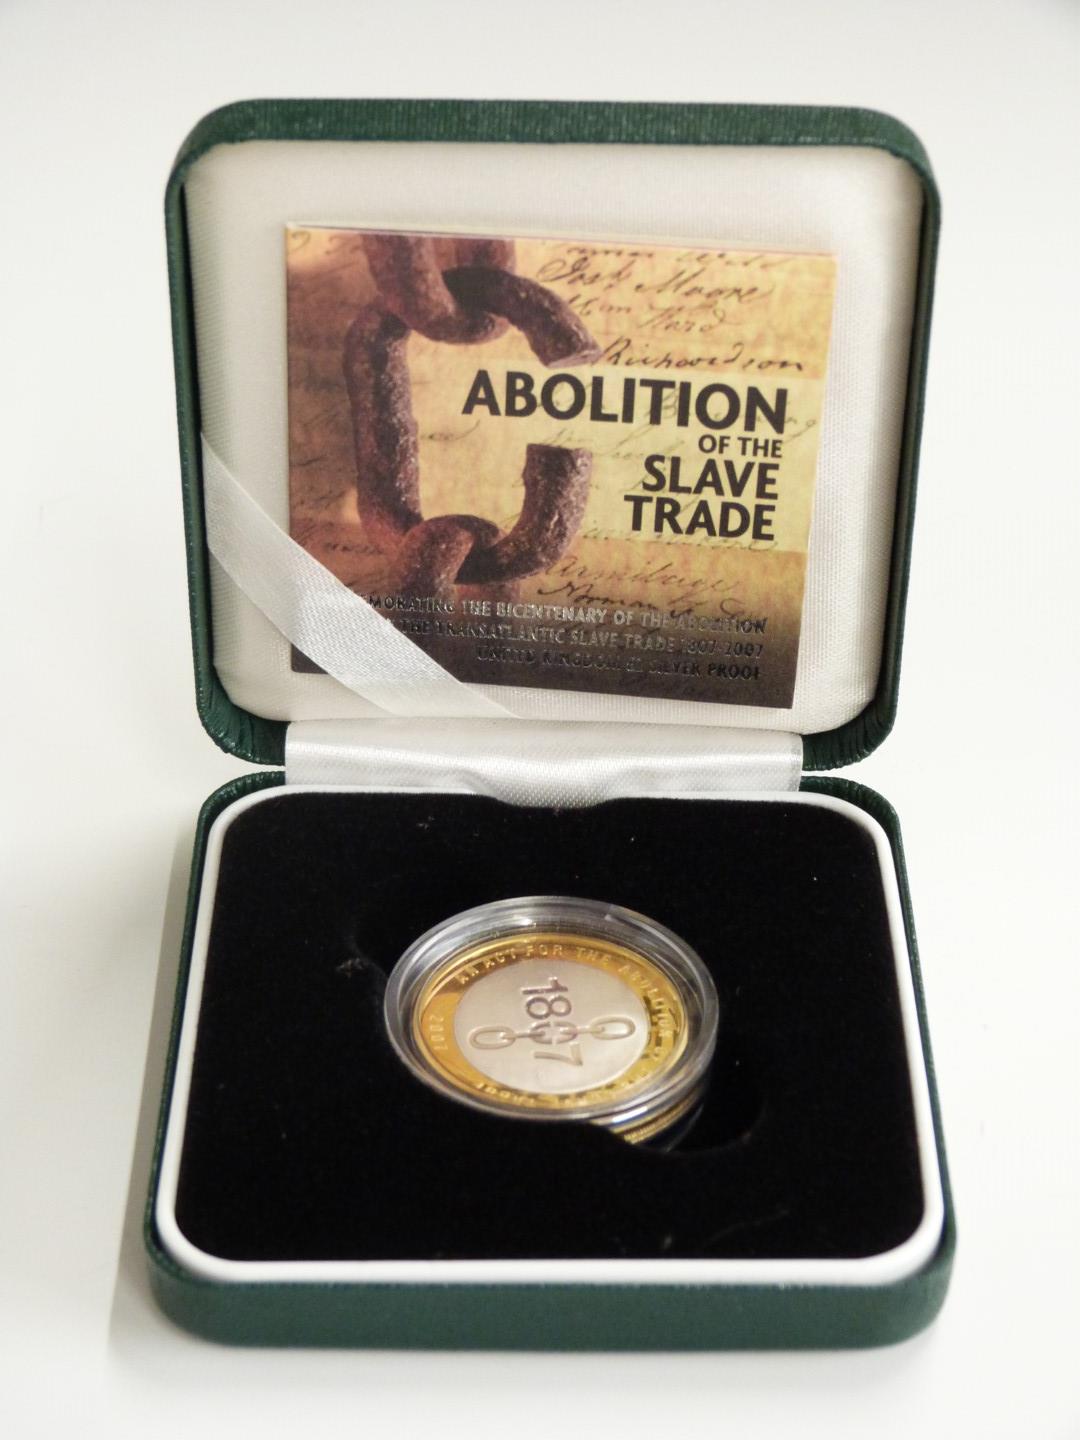 Four Royal Mint silver proof £2 coins for 2007, two Acts of Union and two slavery examples, all - Image 3 of 5